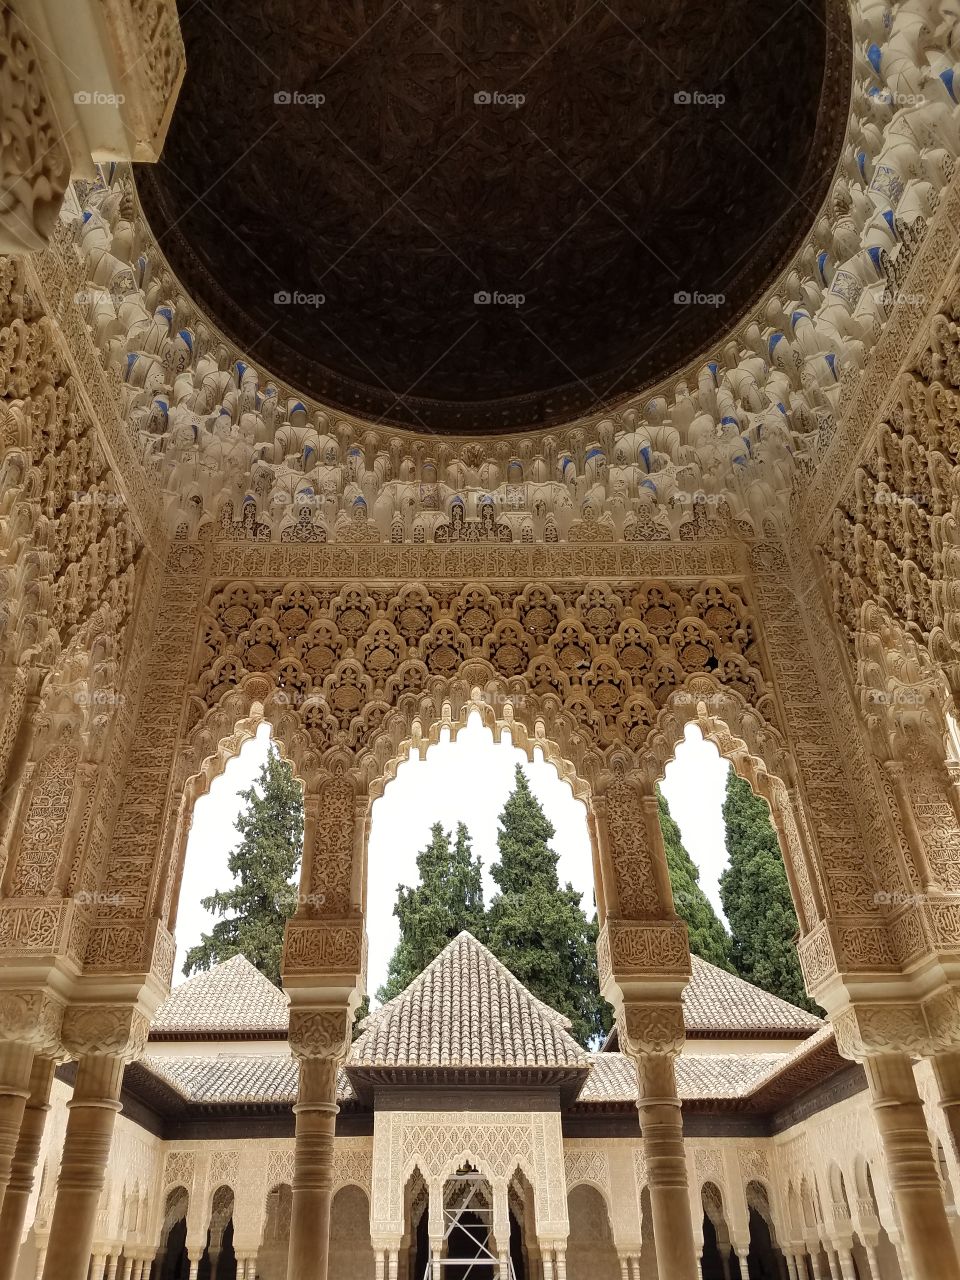 Detailed Panels in the Palace of Alhambra